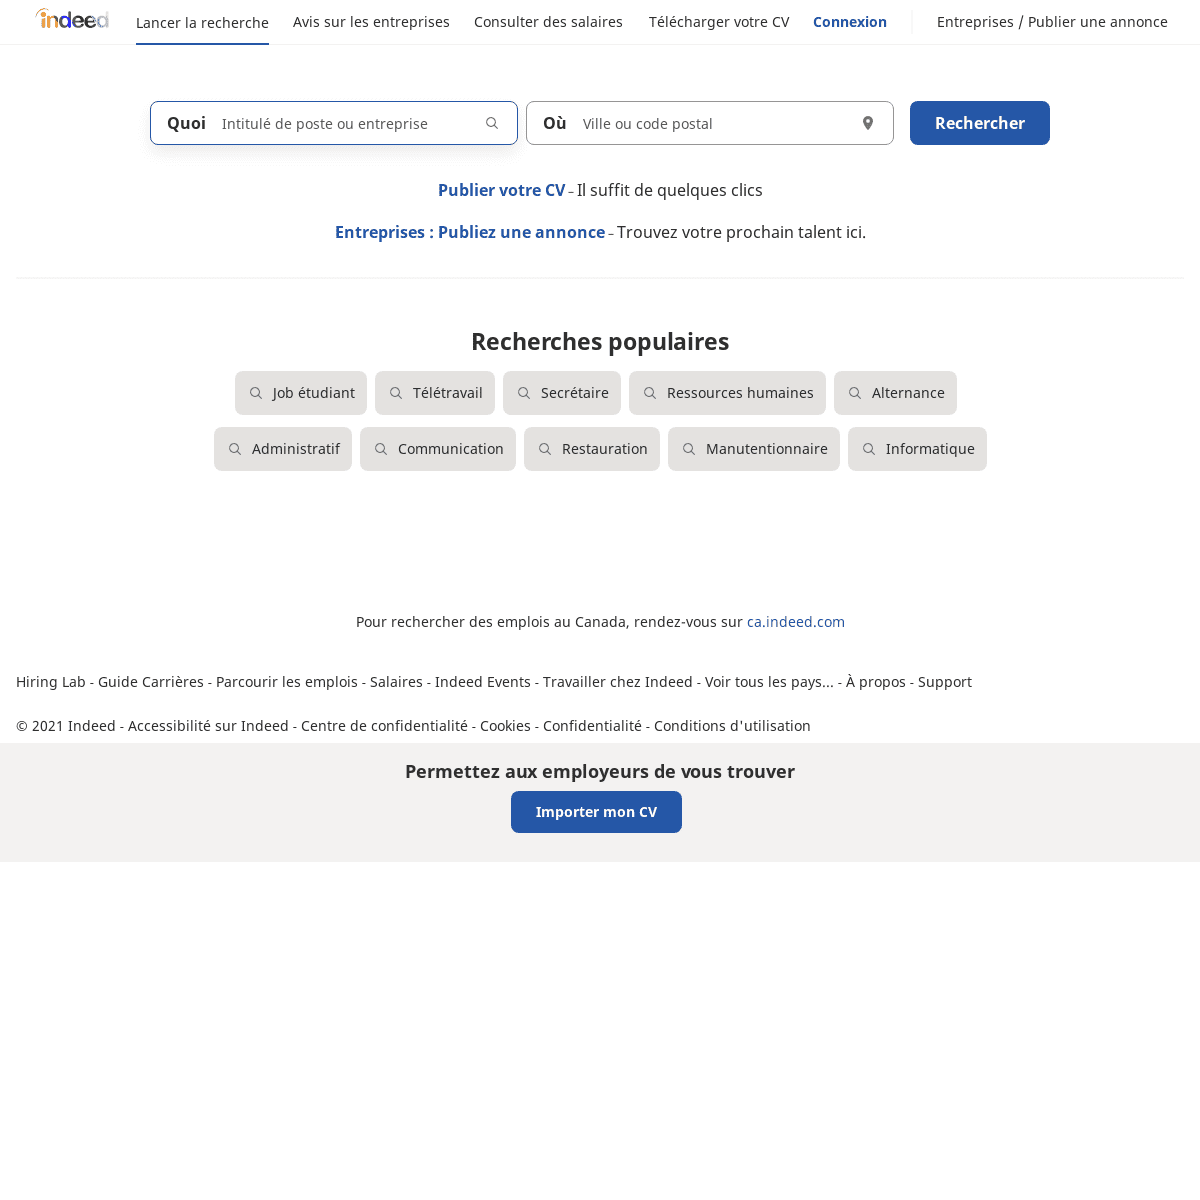 A complete backup of https://indeed.fr